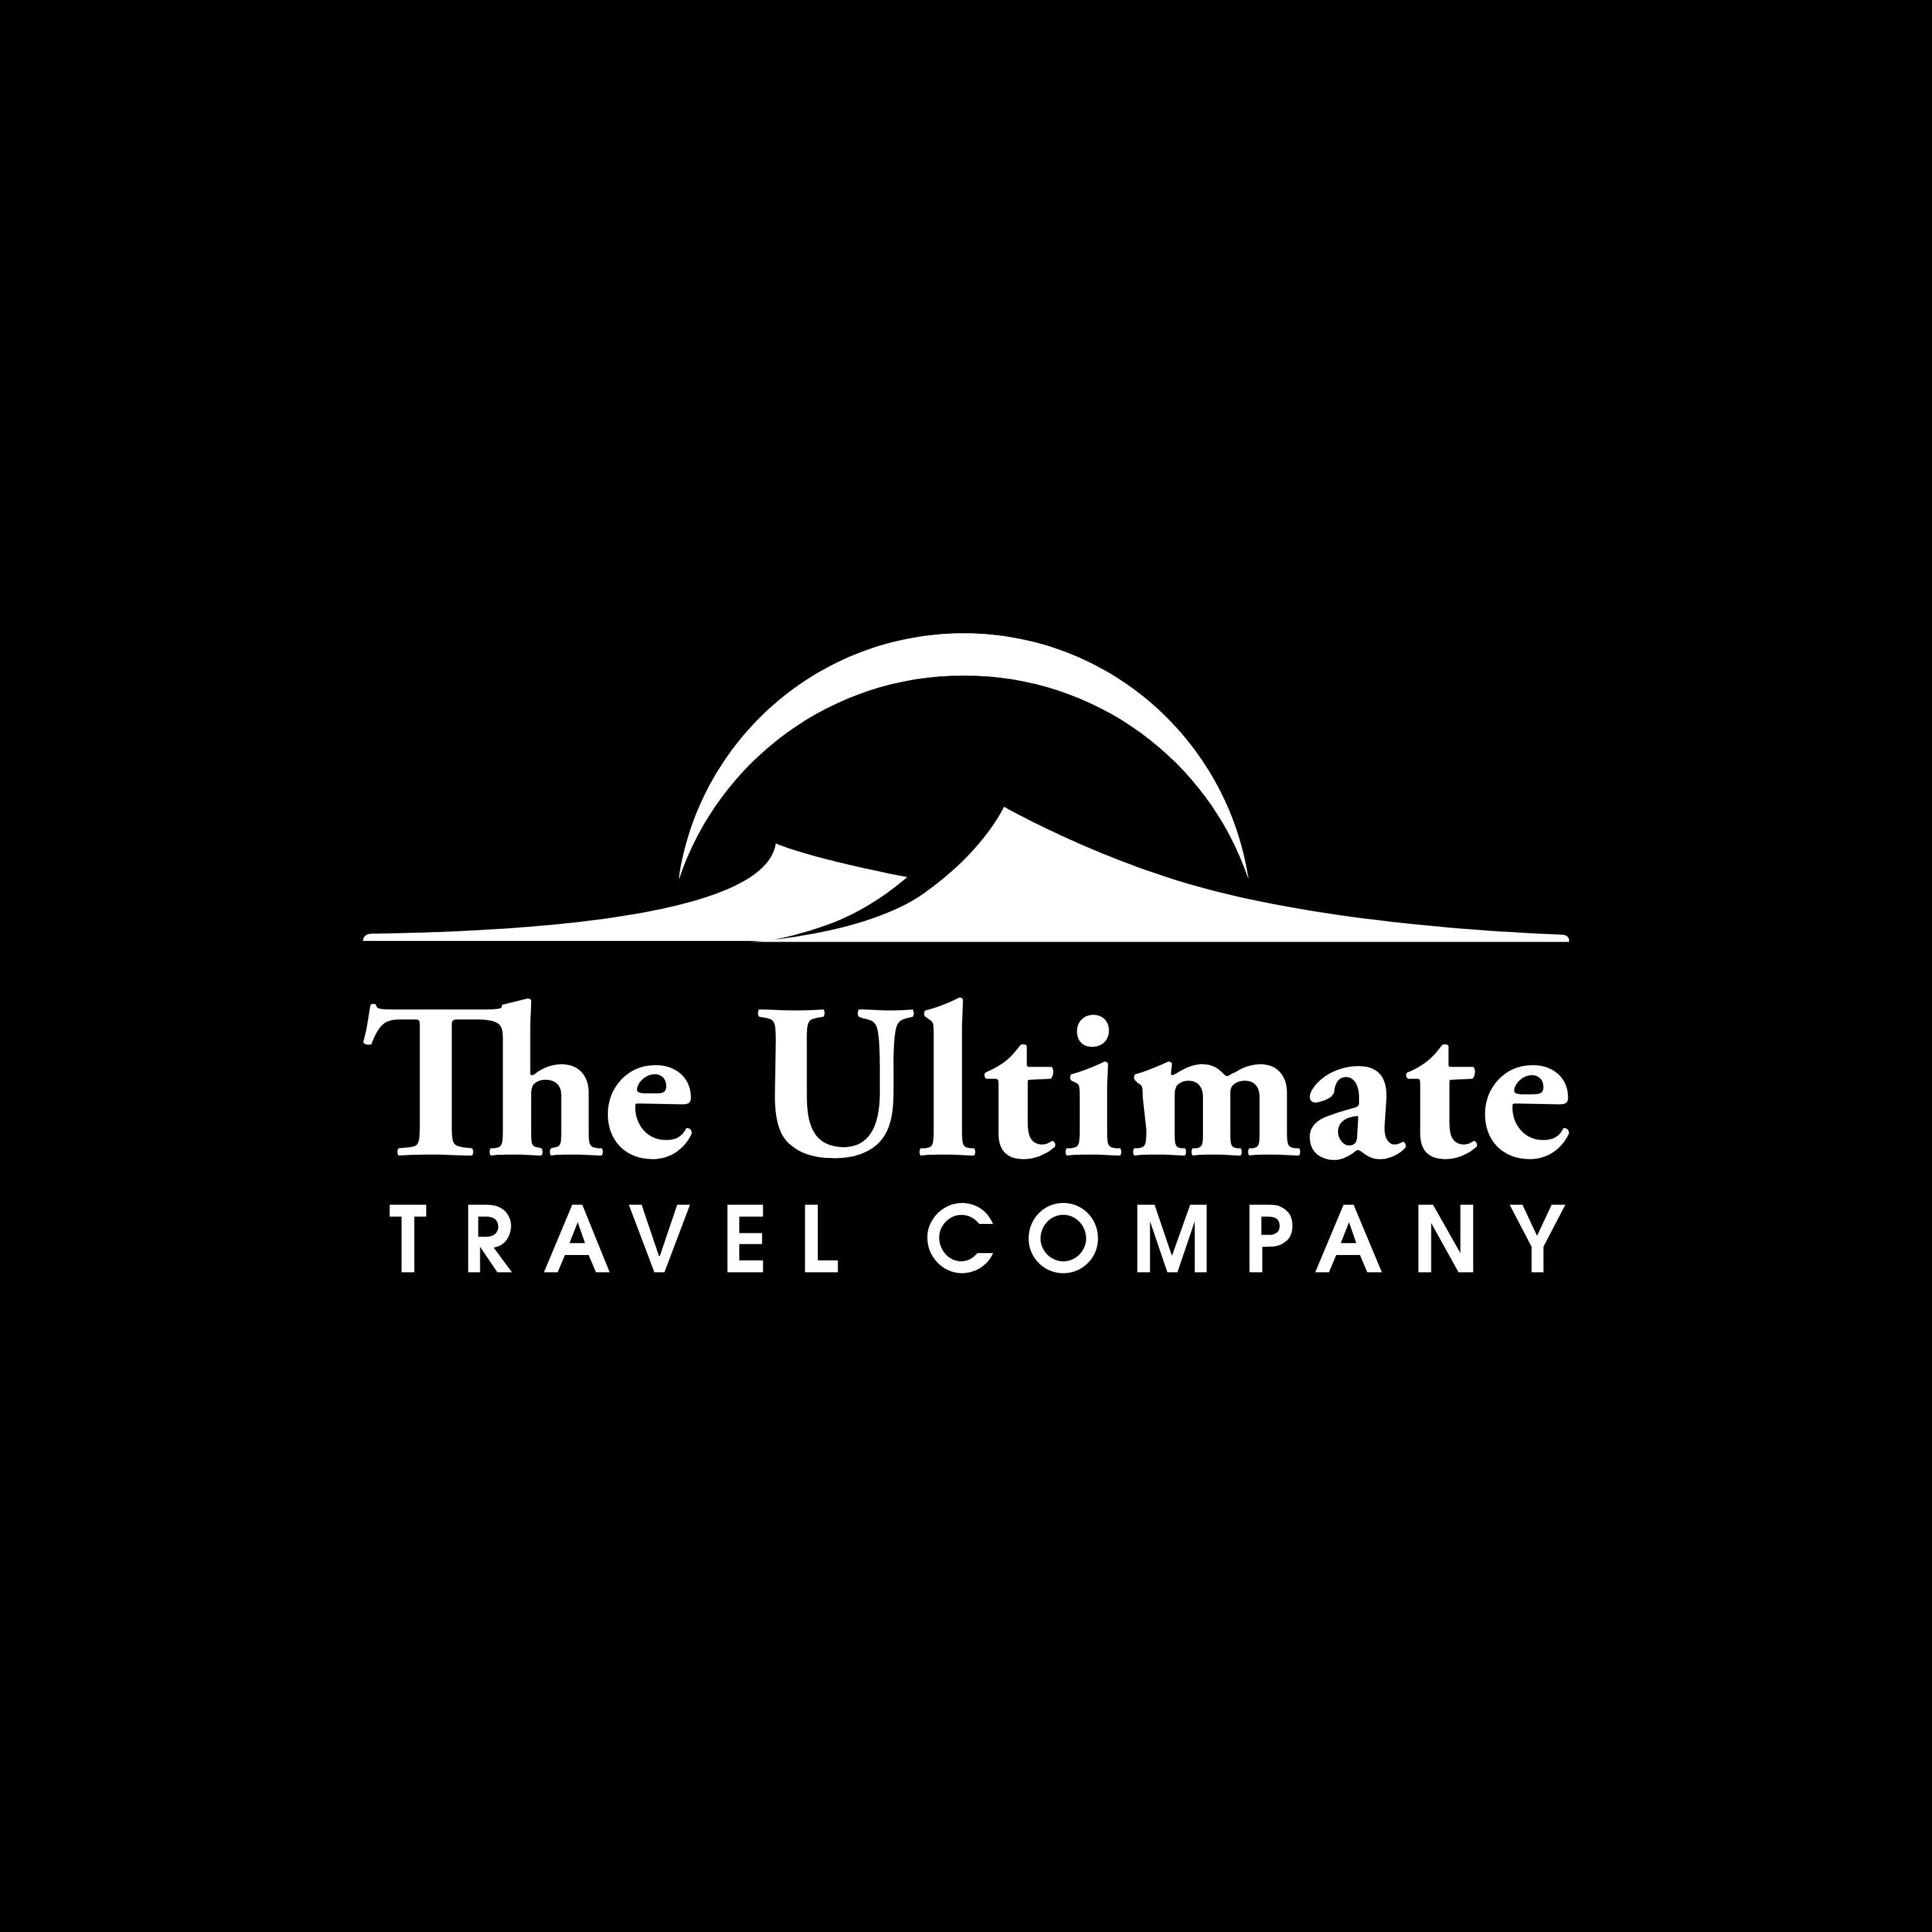 the travel company limited